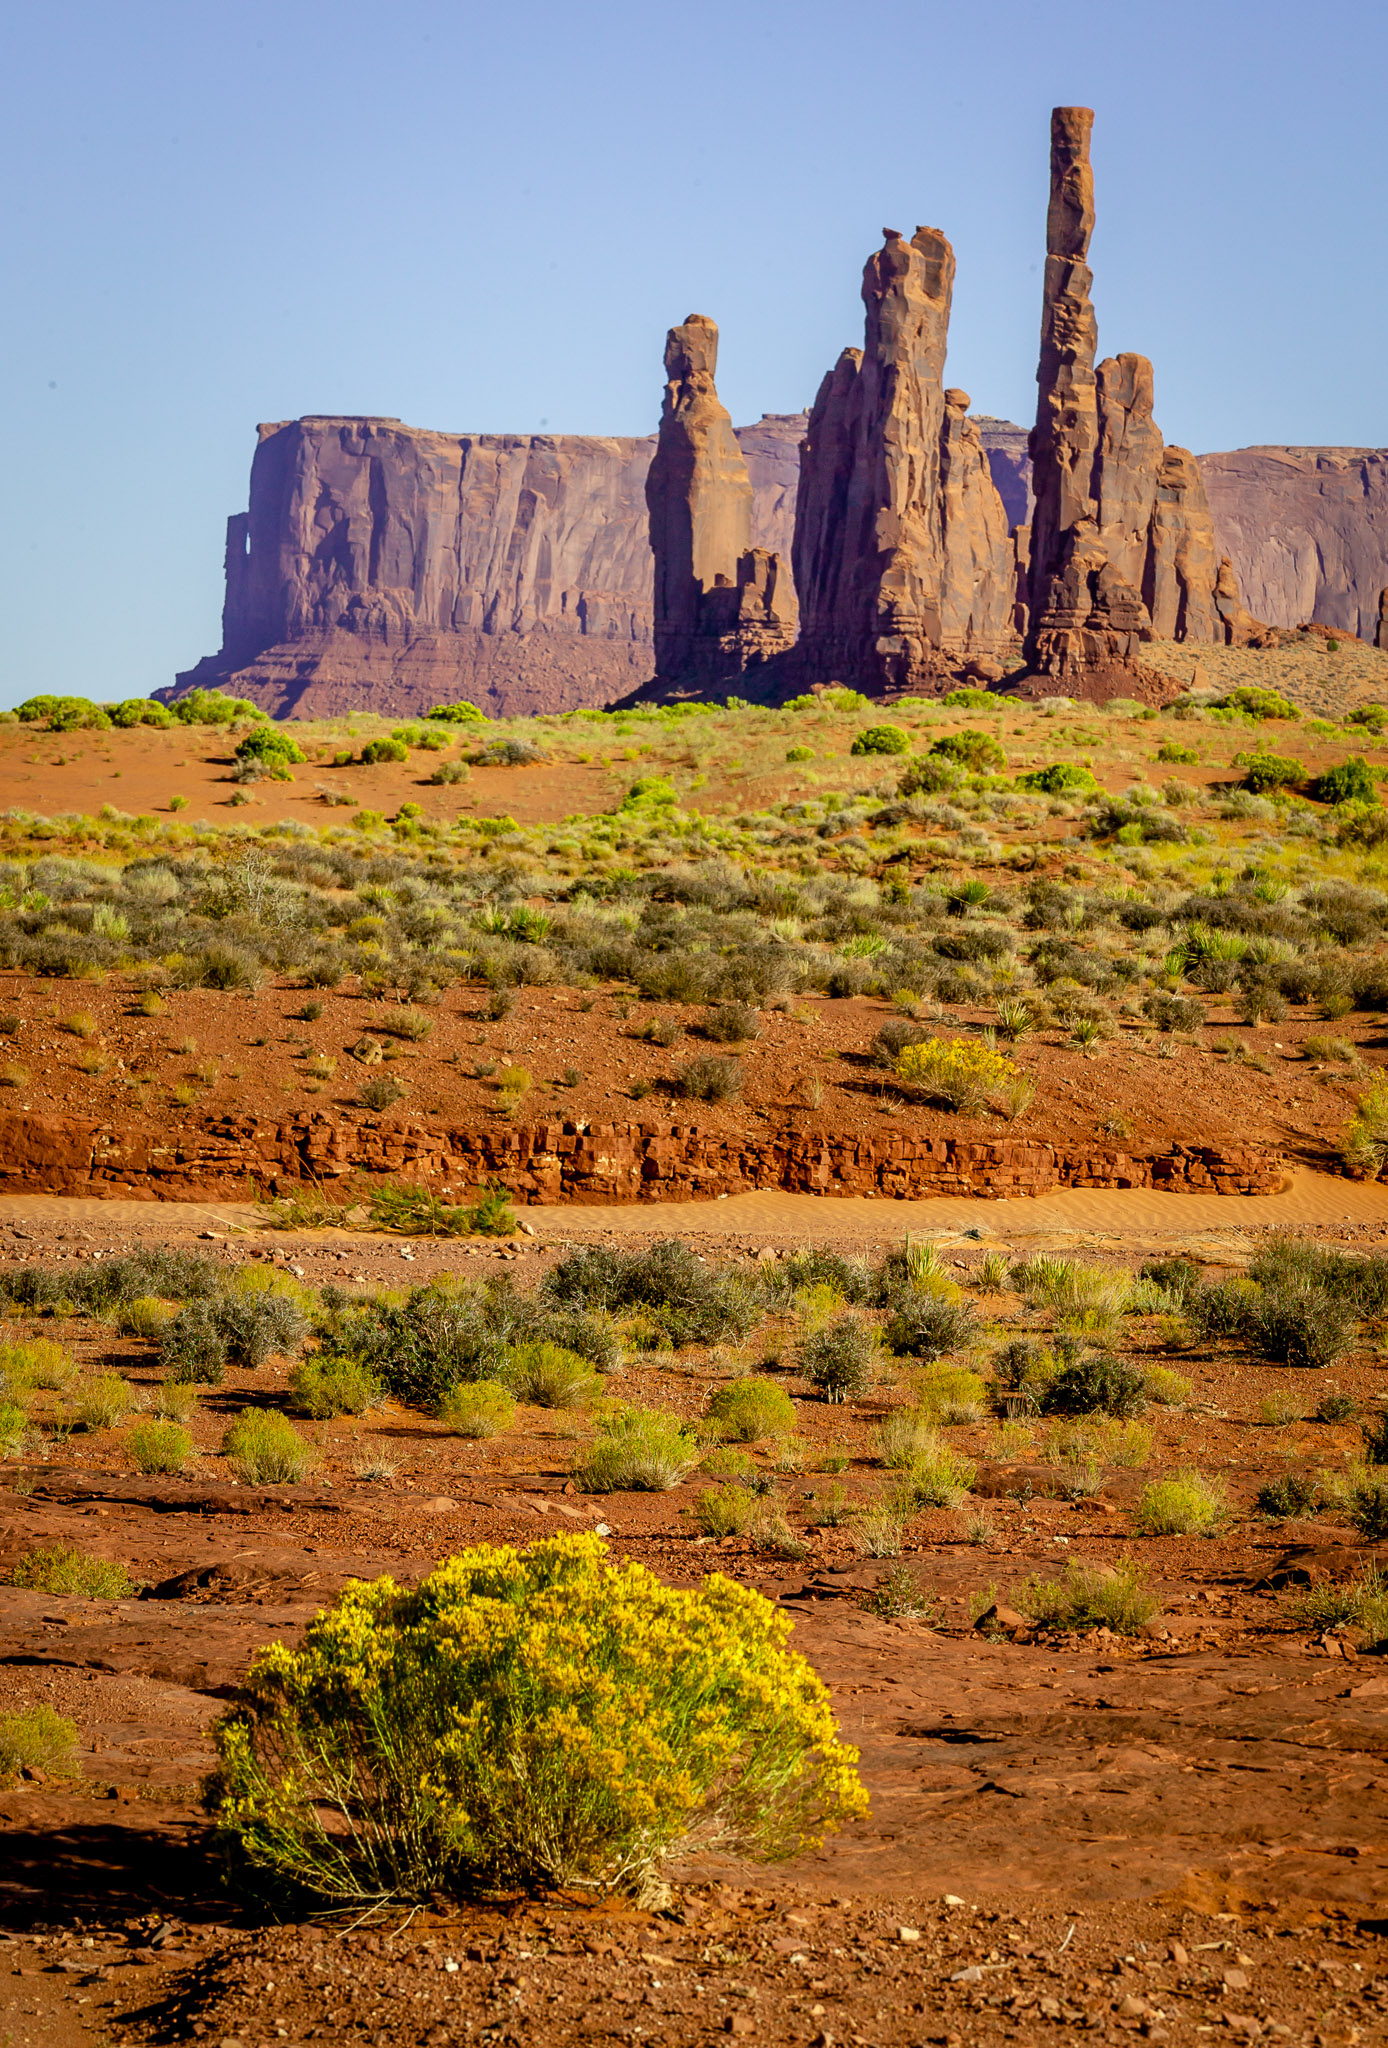 Totem Poles, Monument Valley